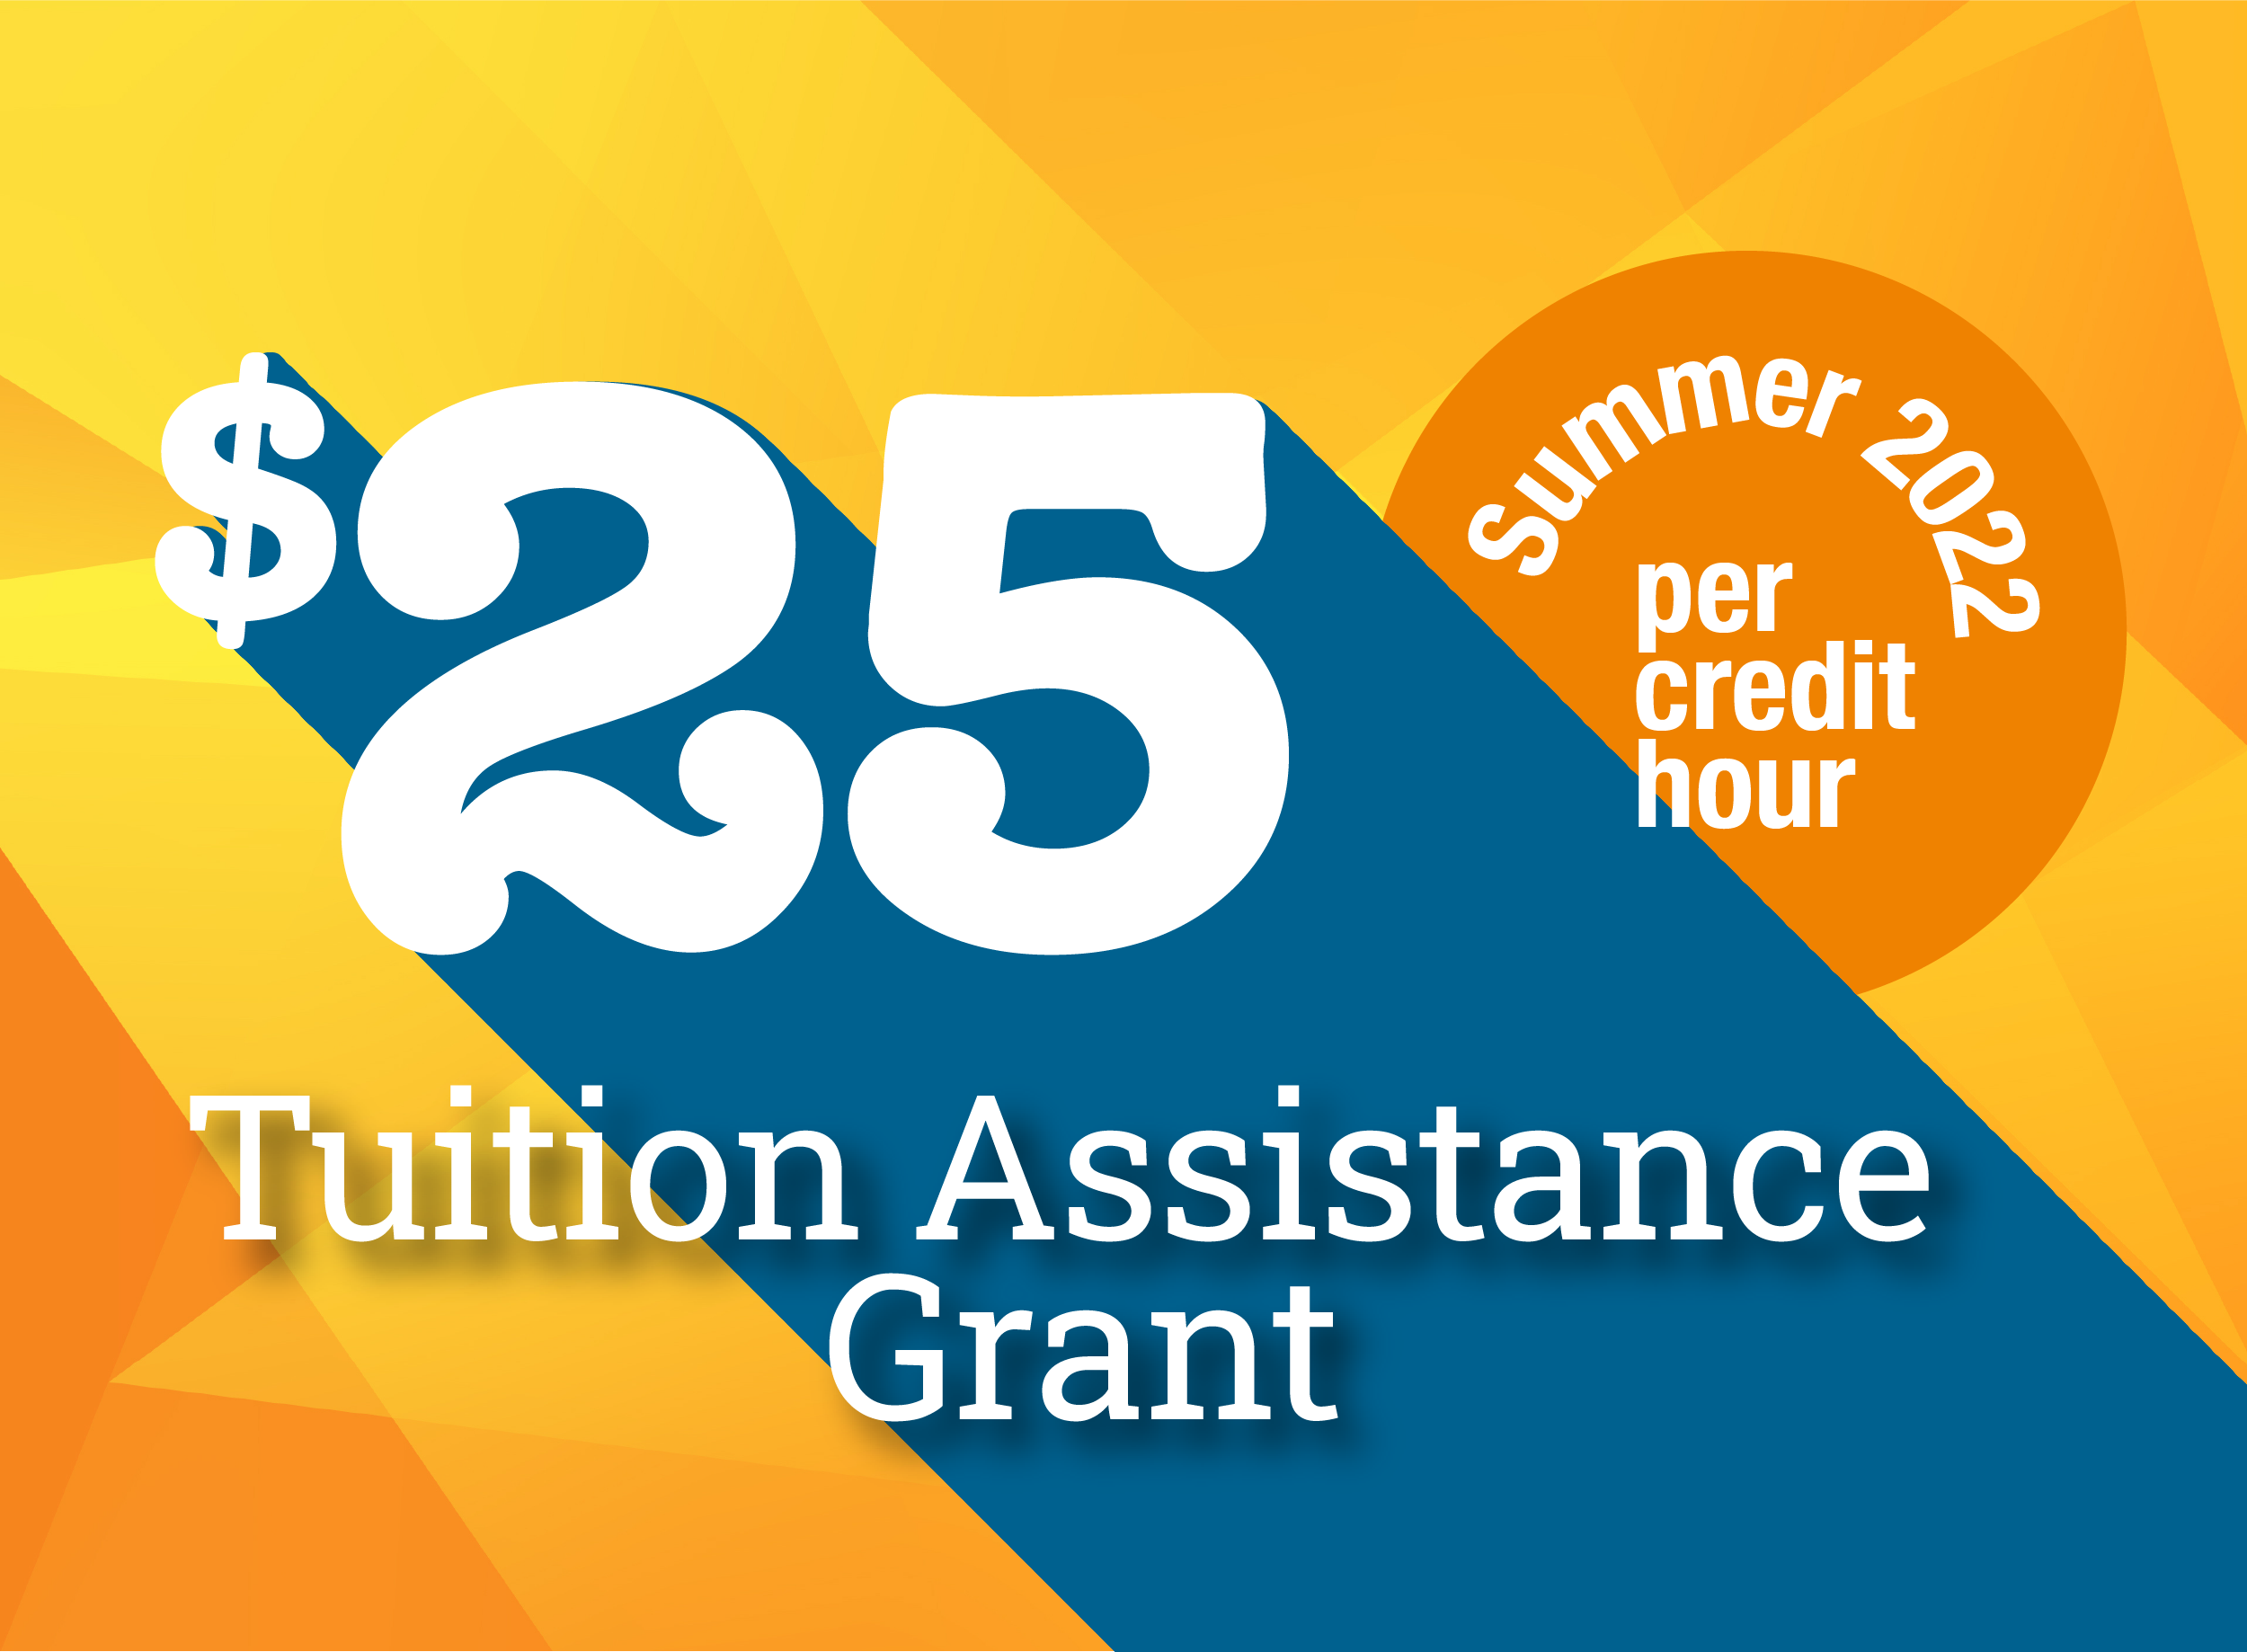 Summer 2022 tuition assistance grant available.